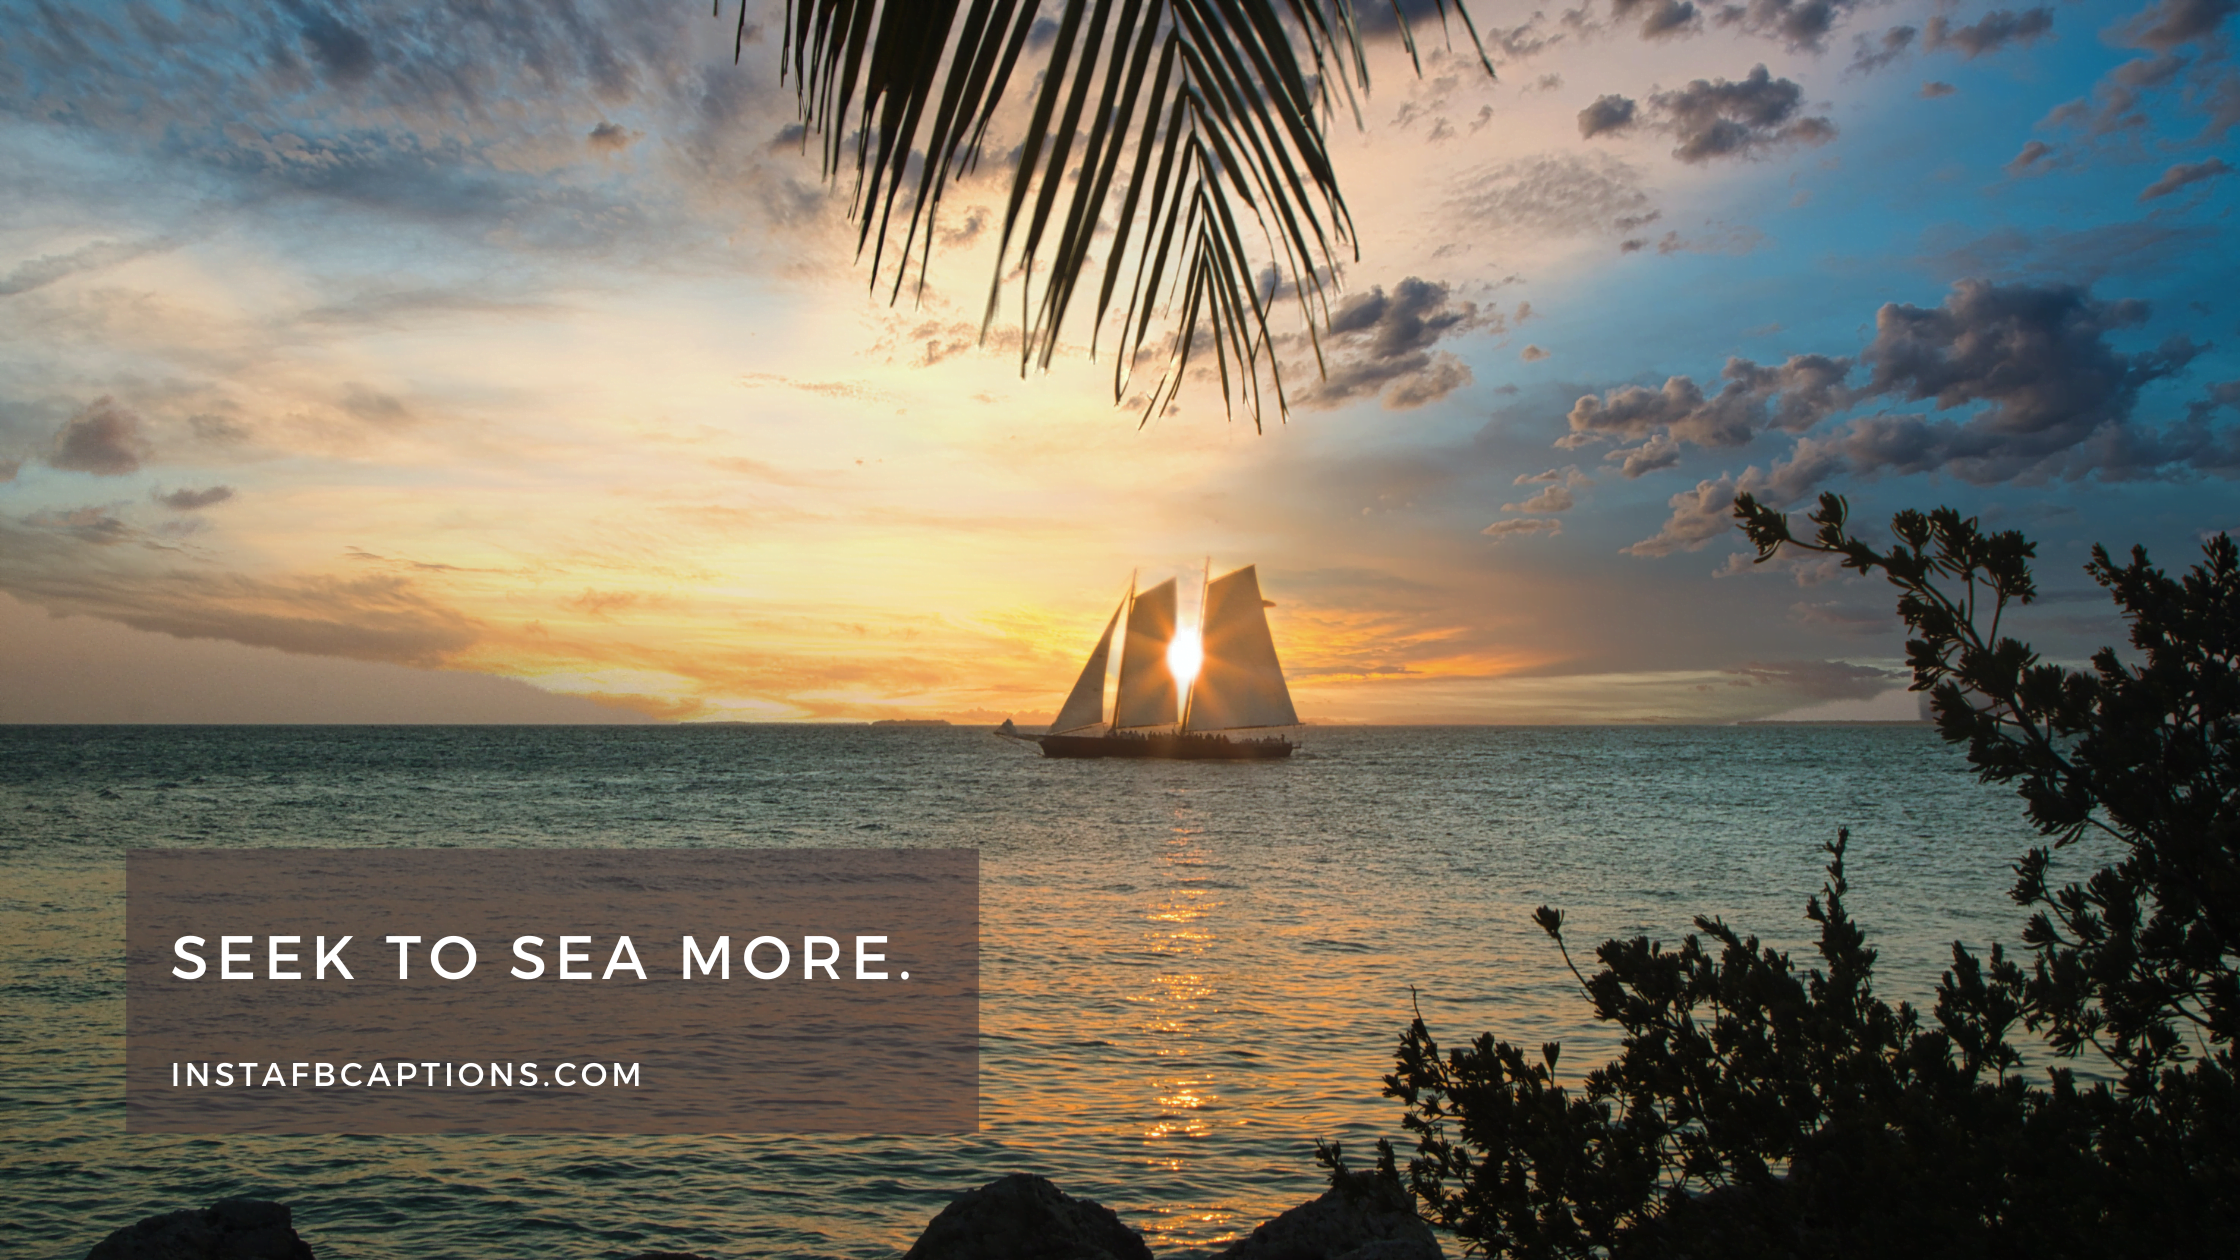 Seek to sea more.  - Best Key West Captions  - 98 Key West Quotes, Captions, Puns, Phrases for 2022